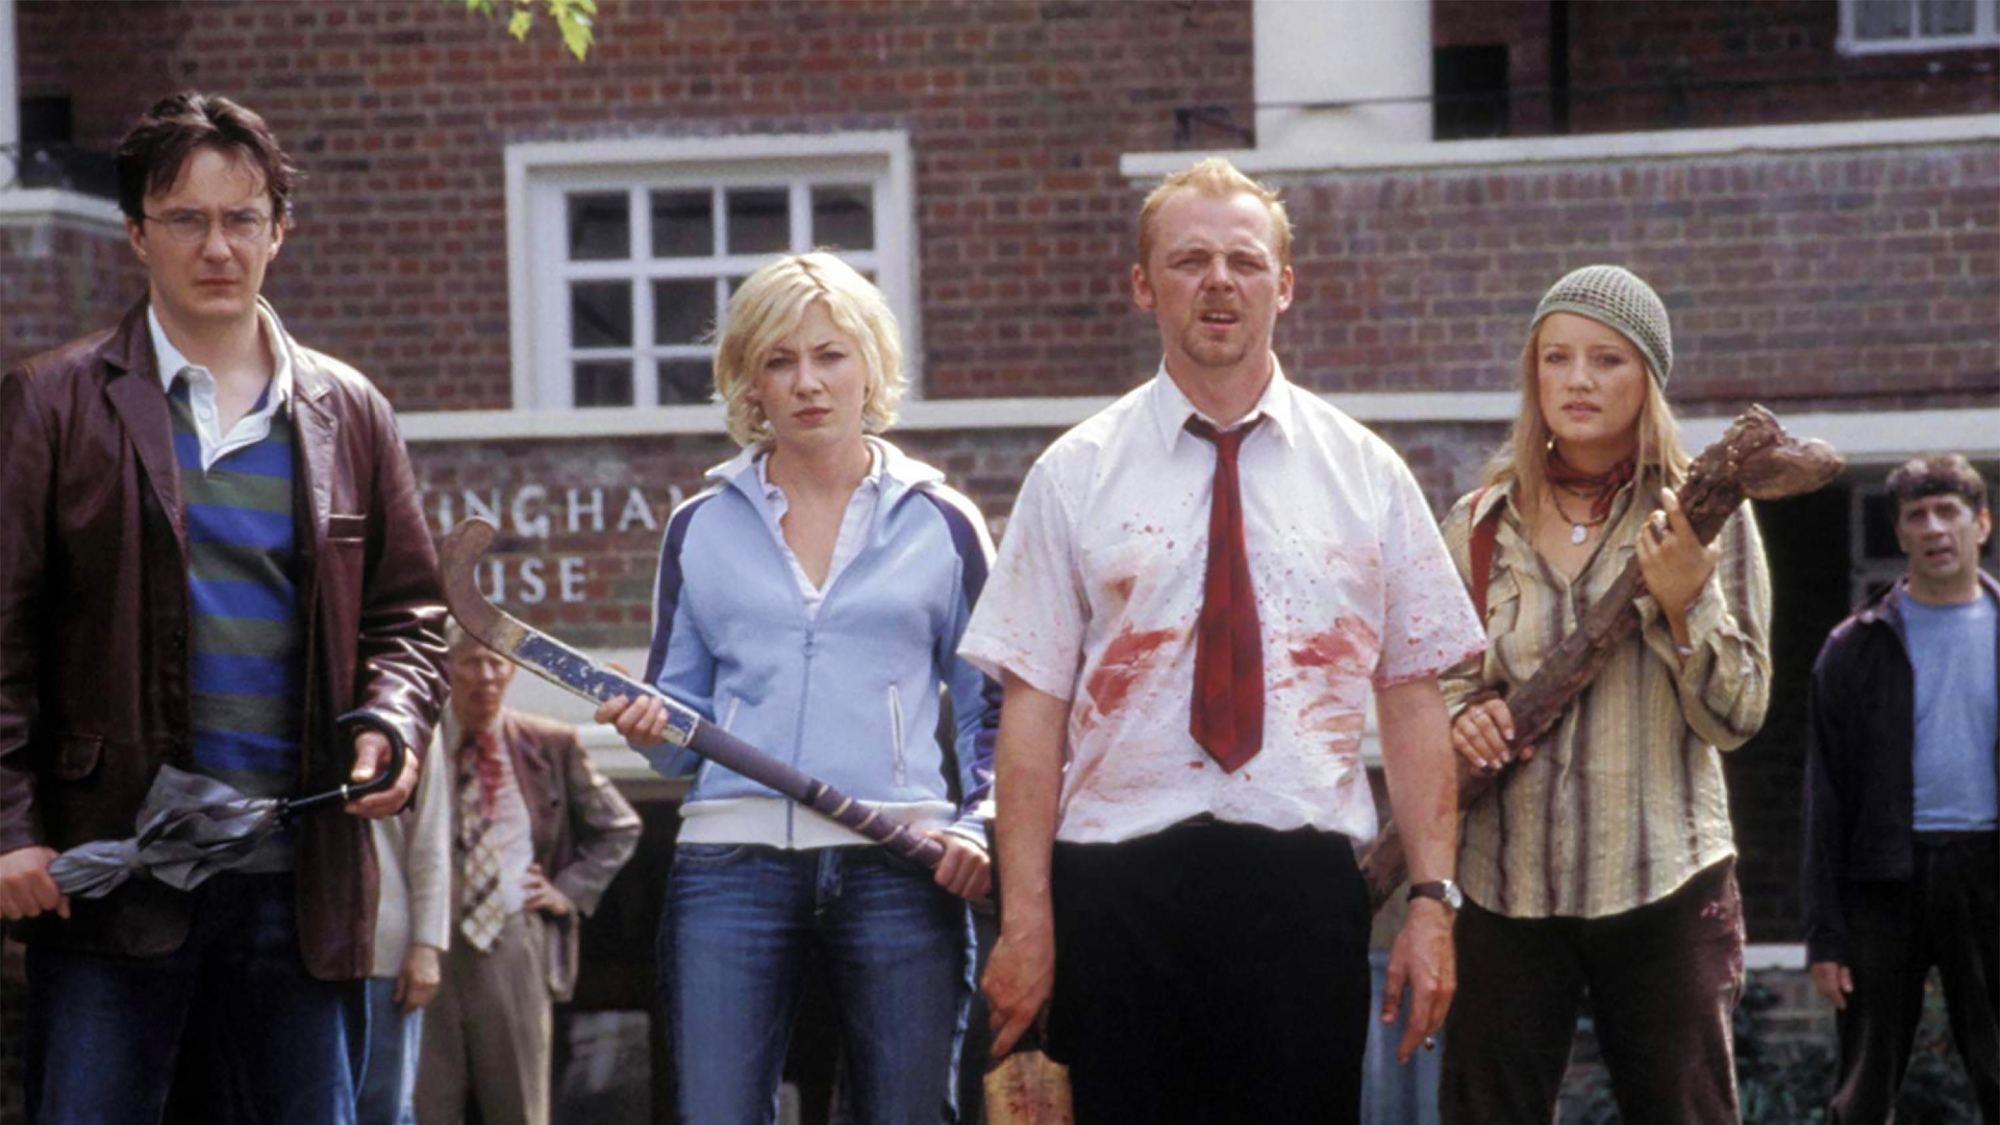 (left to right) Dylan Moran, Kate Ashfield, Simon Pegg, Lucy Davies in Shaun of the Dead